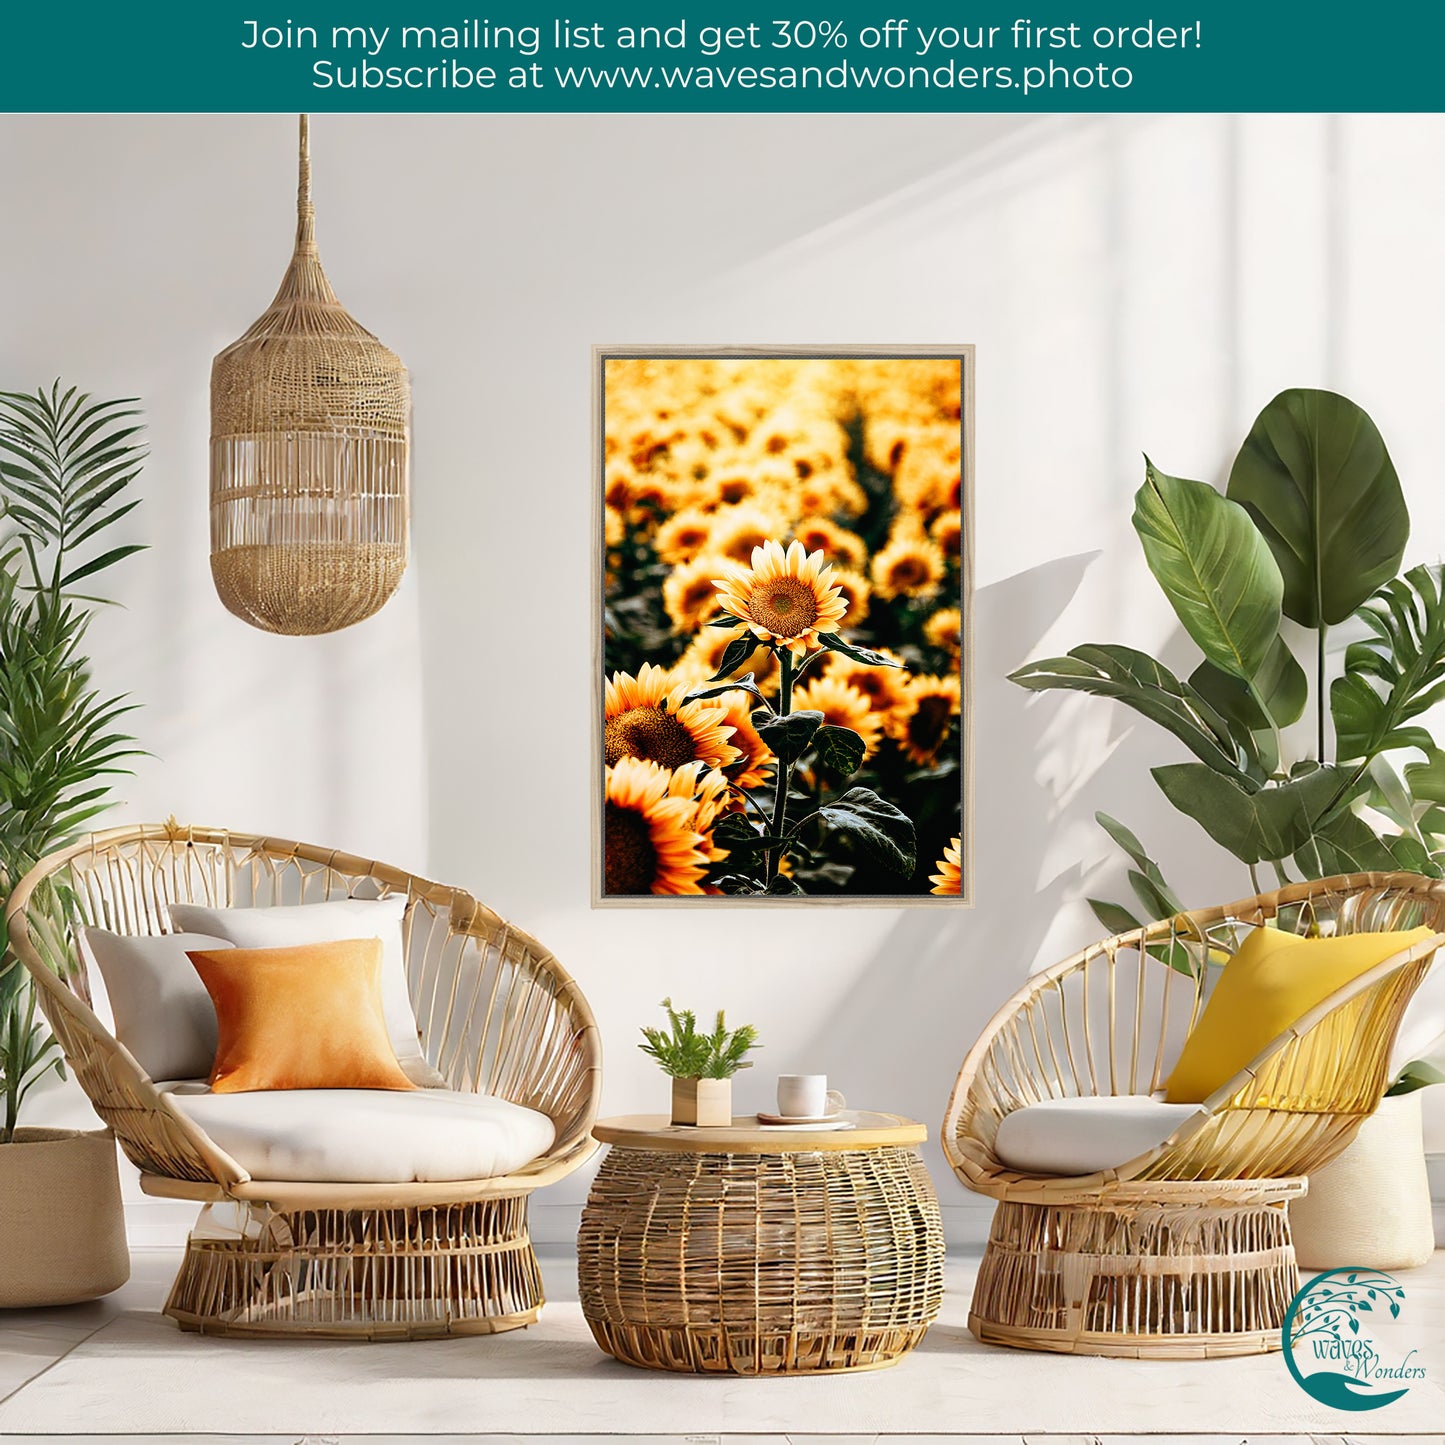 a living room with wicker chairs and a picture of sunflowers